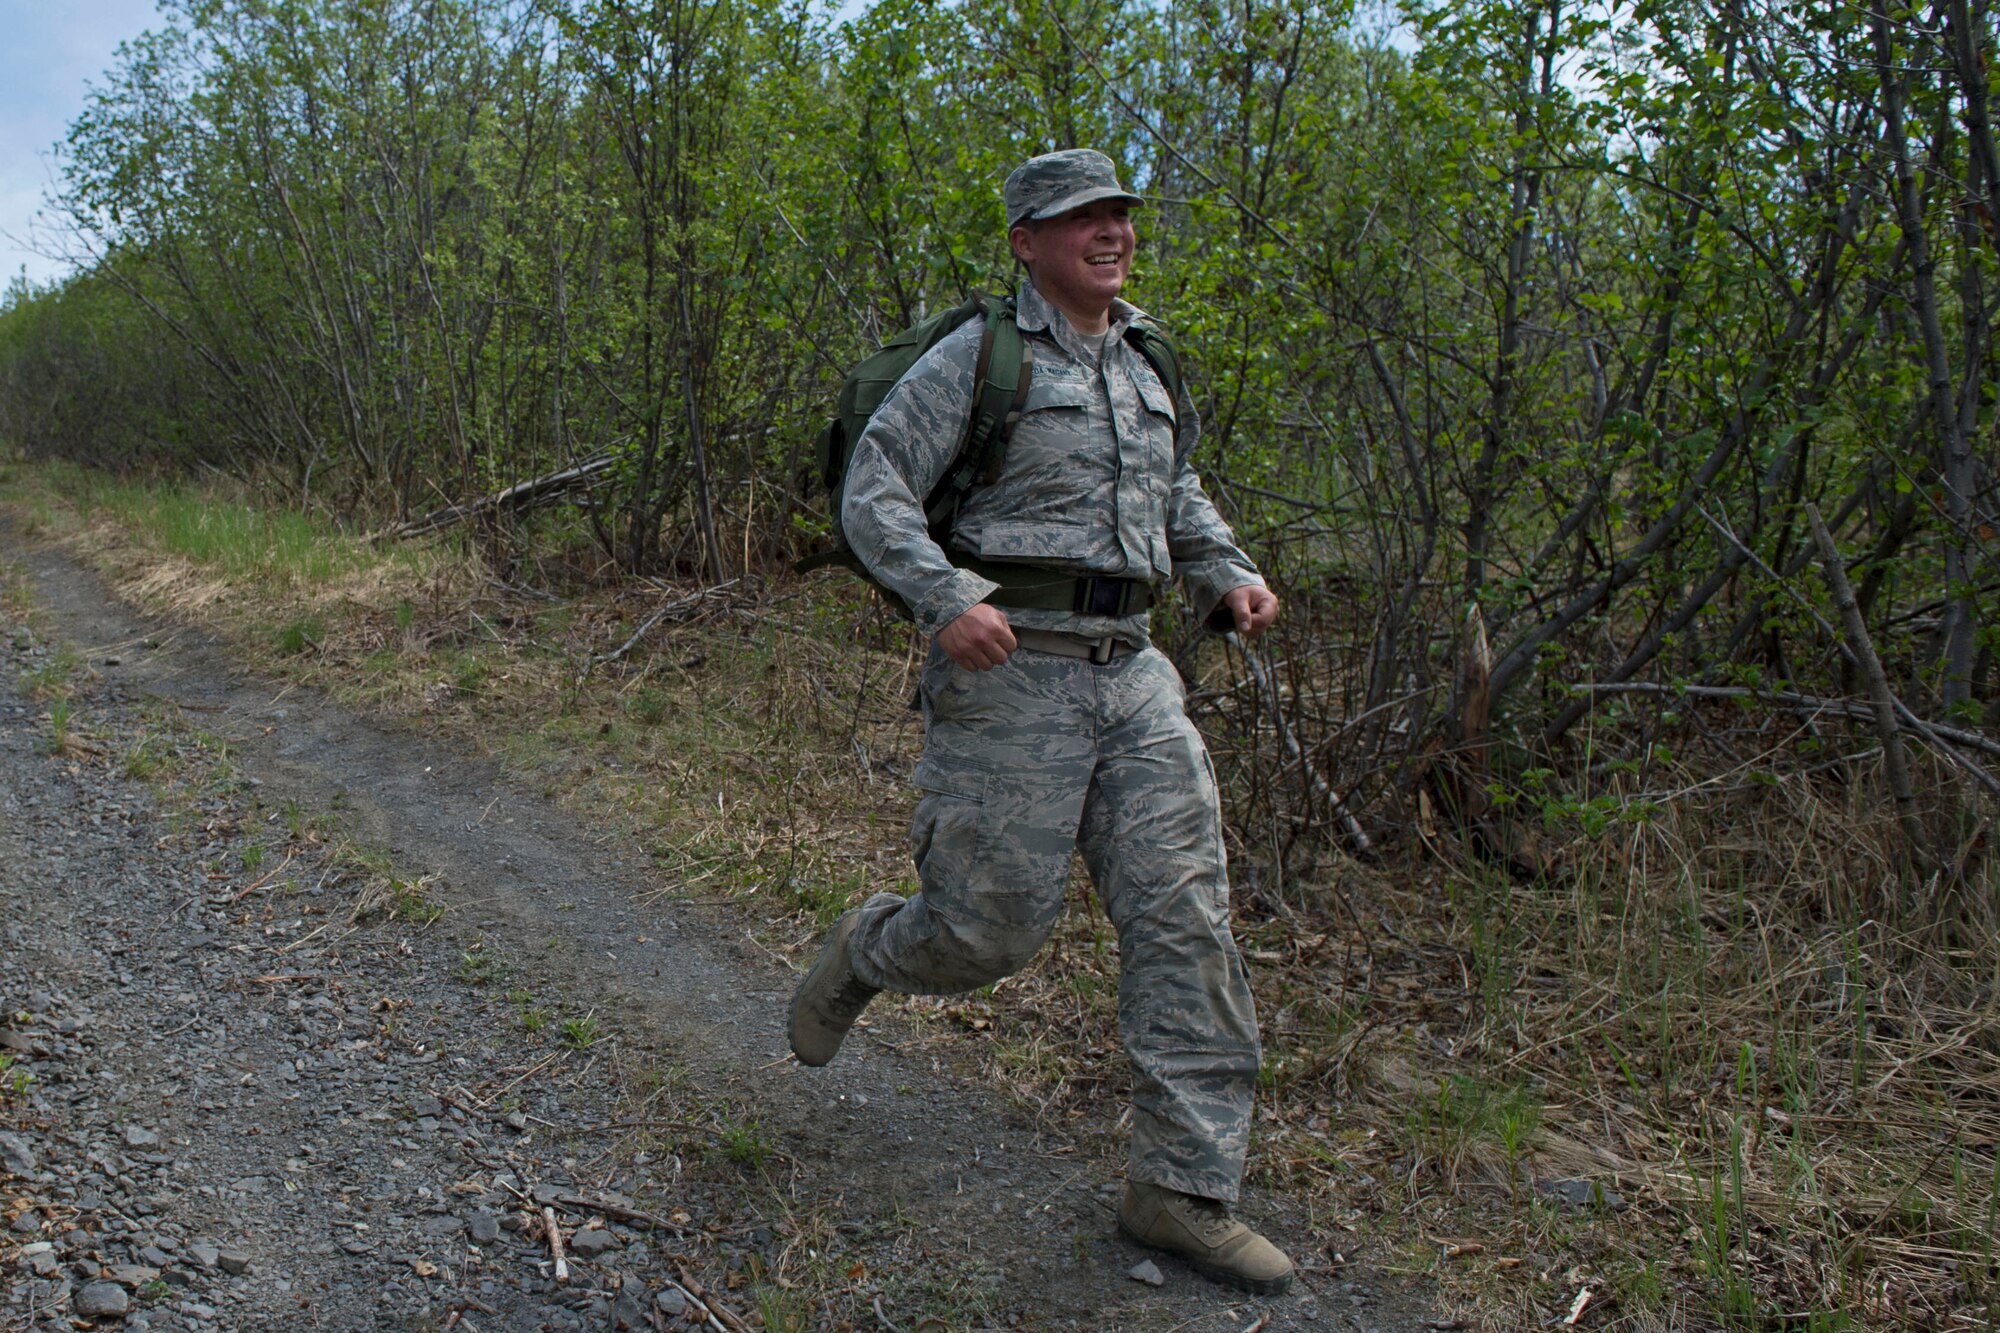 Airman 1st Class Christian Castaneda-Magana, 773d Civil Engineer Squadron, participates in the Combat Cross-Country Series Three-Mile Mountain Run at Arctic Valley, Alaska, June 9, 2017. Team members from 773d CES took first place in the competition. 